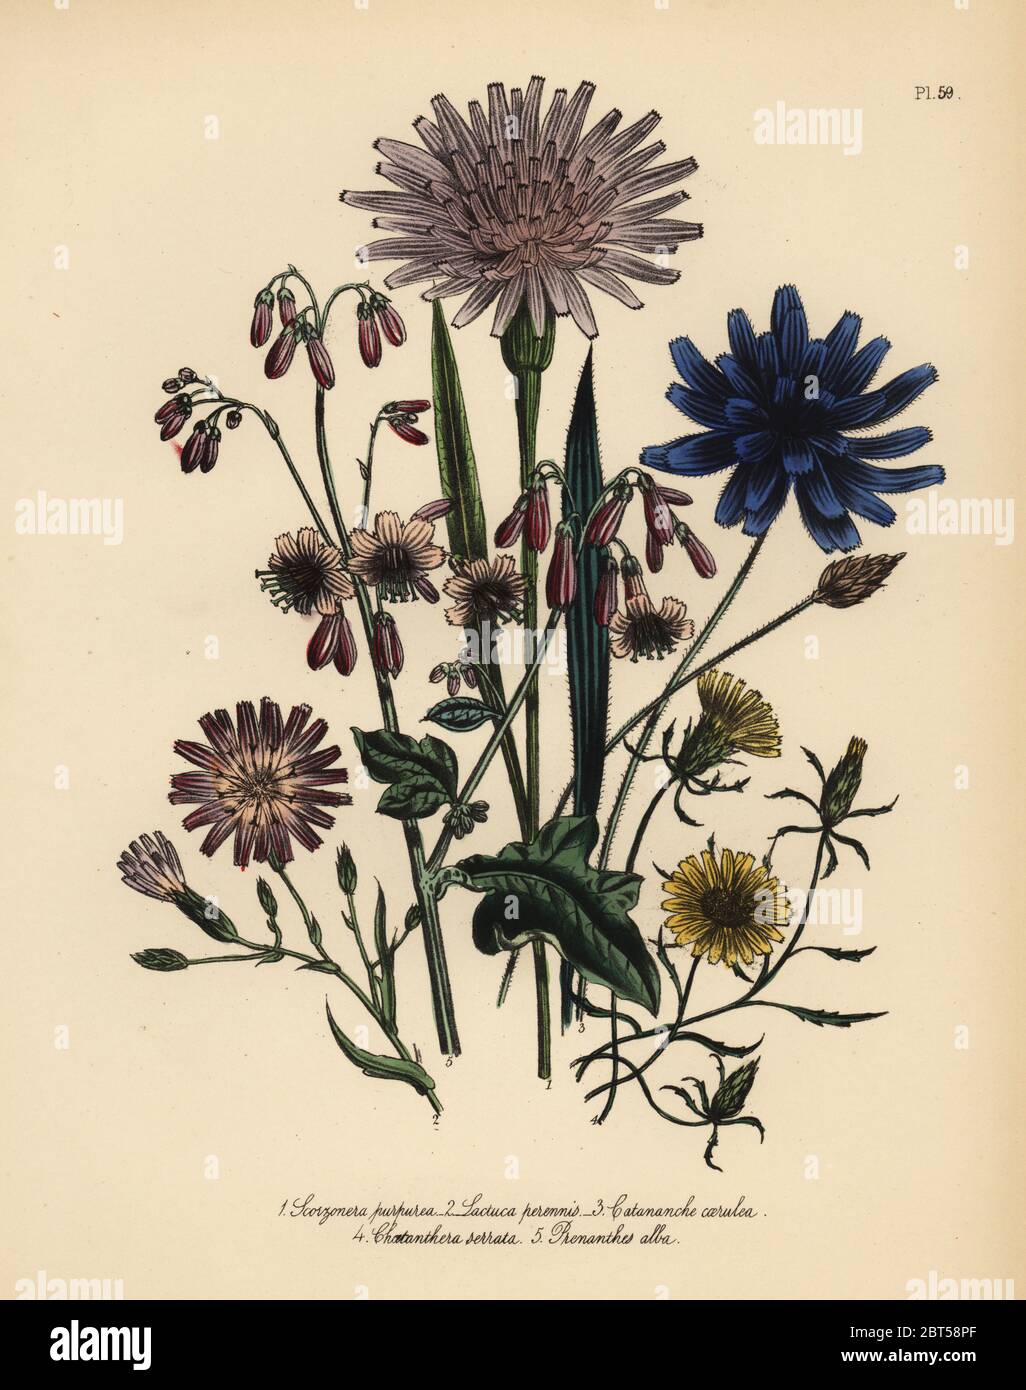 Purple viper grass, Scorzonera purpurea, perennial lettuce, Lactuca perennis, blue catananche, Catananche caerulea, serrated-leaved chaetanthera, Chaetanthera serrata, and white prenanthes, Prenanthes alba. Handfinished chromolithograph by Henry Noel Humphreys after an illustration by Jane Loudon from Mrs. Jane Loudon's Ladies Flower Garden of Ornamental Perennials, William S. Orr, London, 1849. Stock Photo